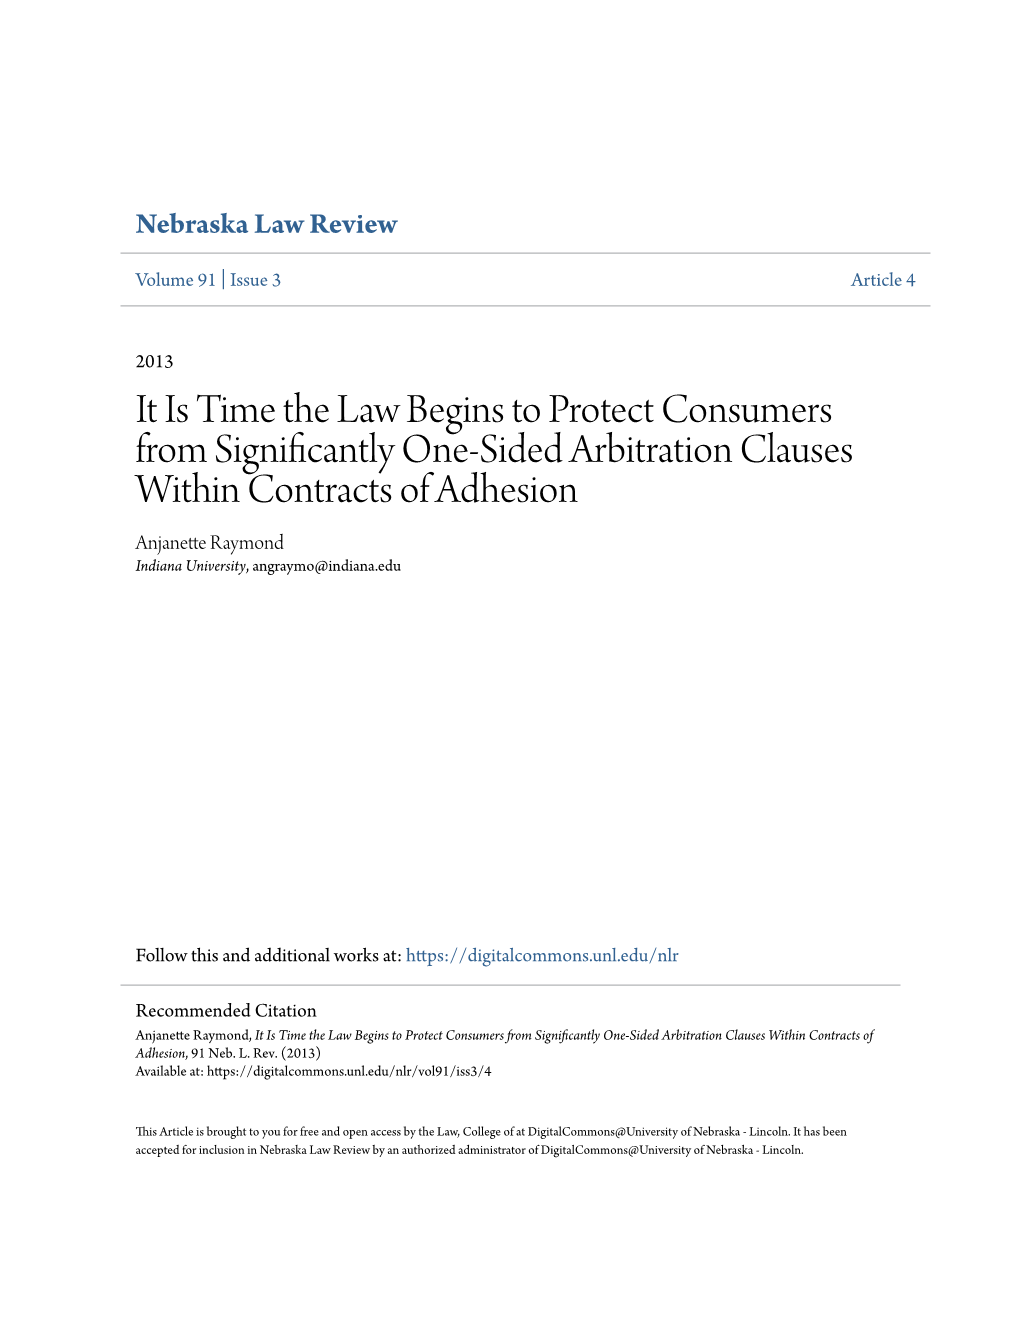 It Is Time the Law Begins to Protect Consumers from Significantly One-Sided Arbitration Clauses Within Contracts of Adhesion